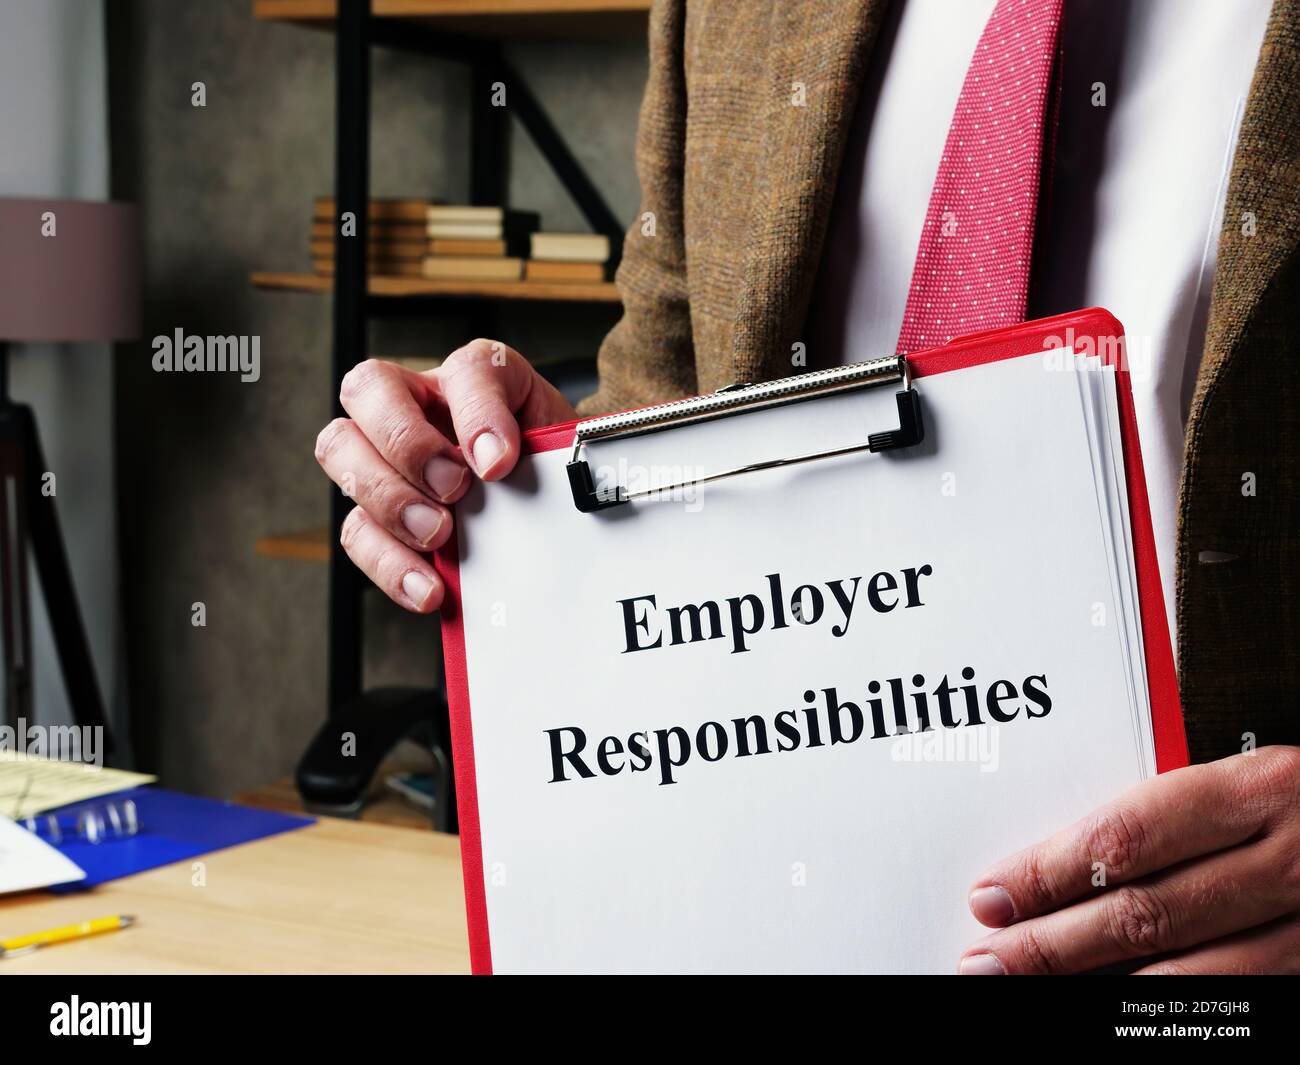 Employer responsibilities and duties in the manager hands. Stock Photo